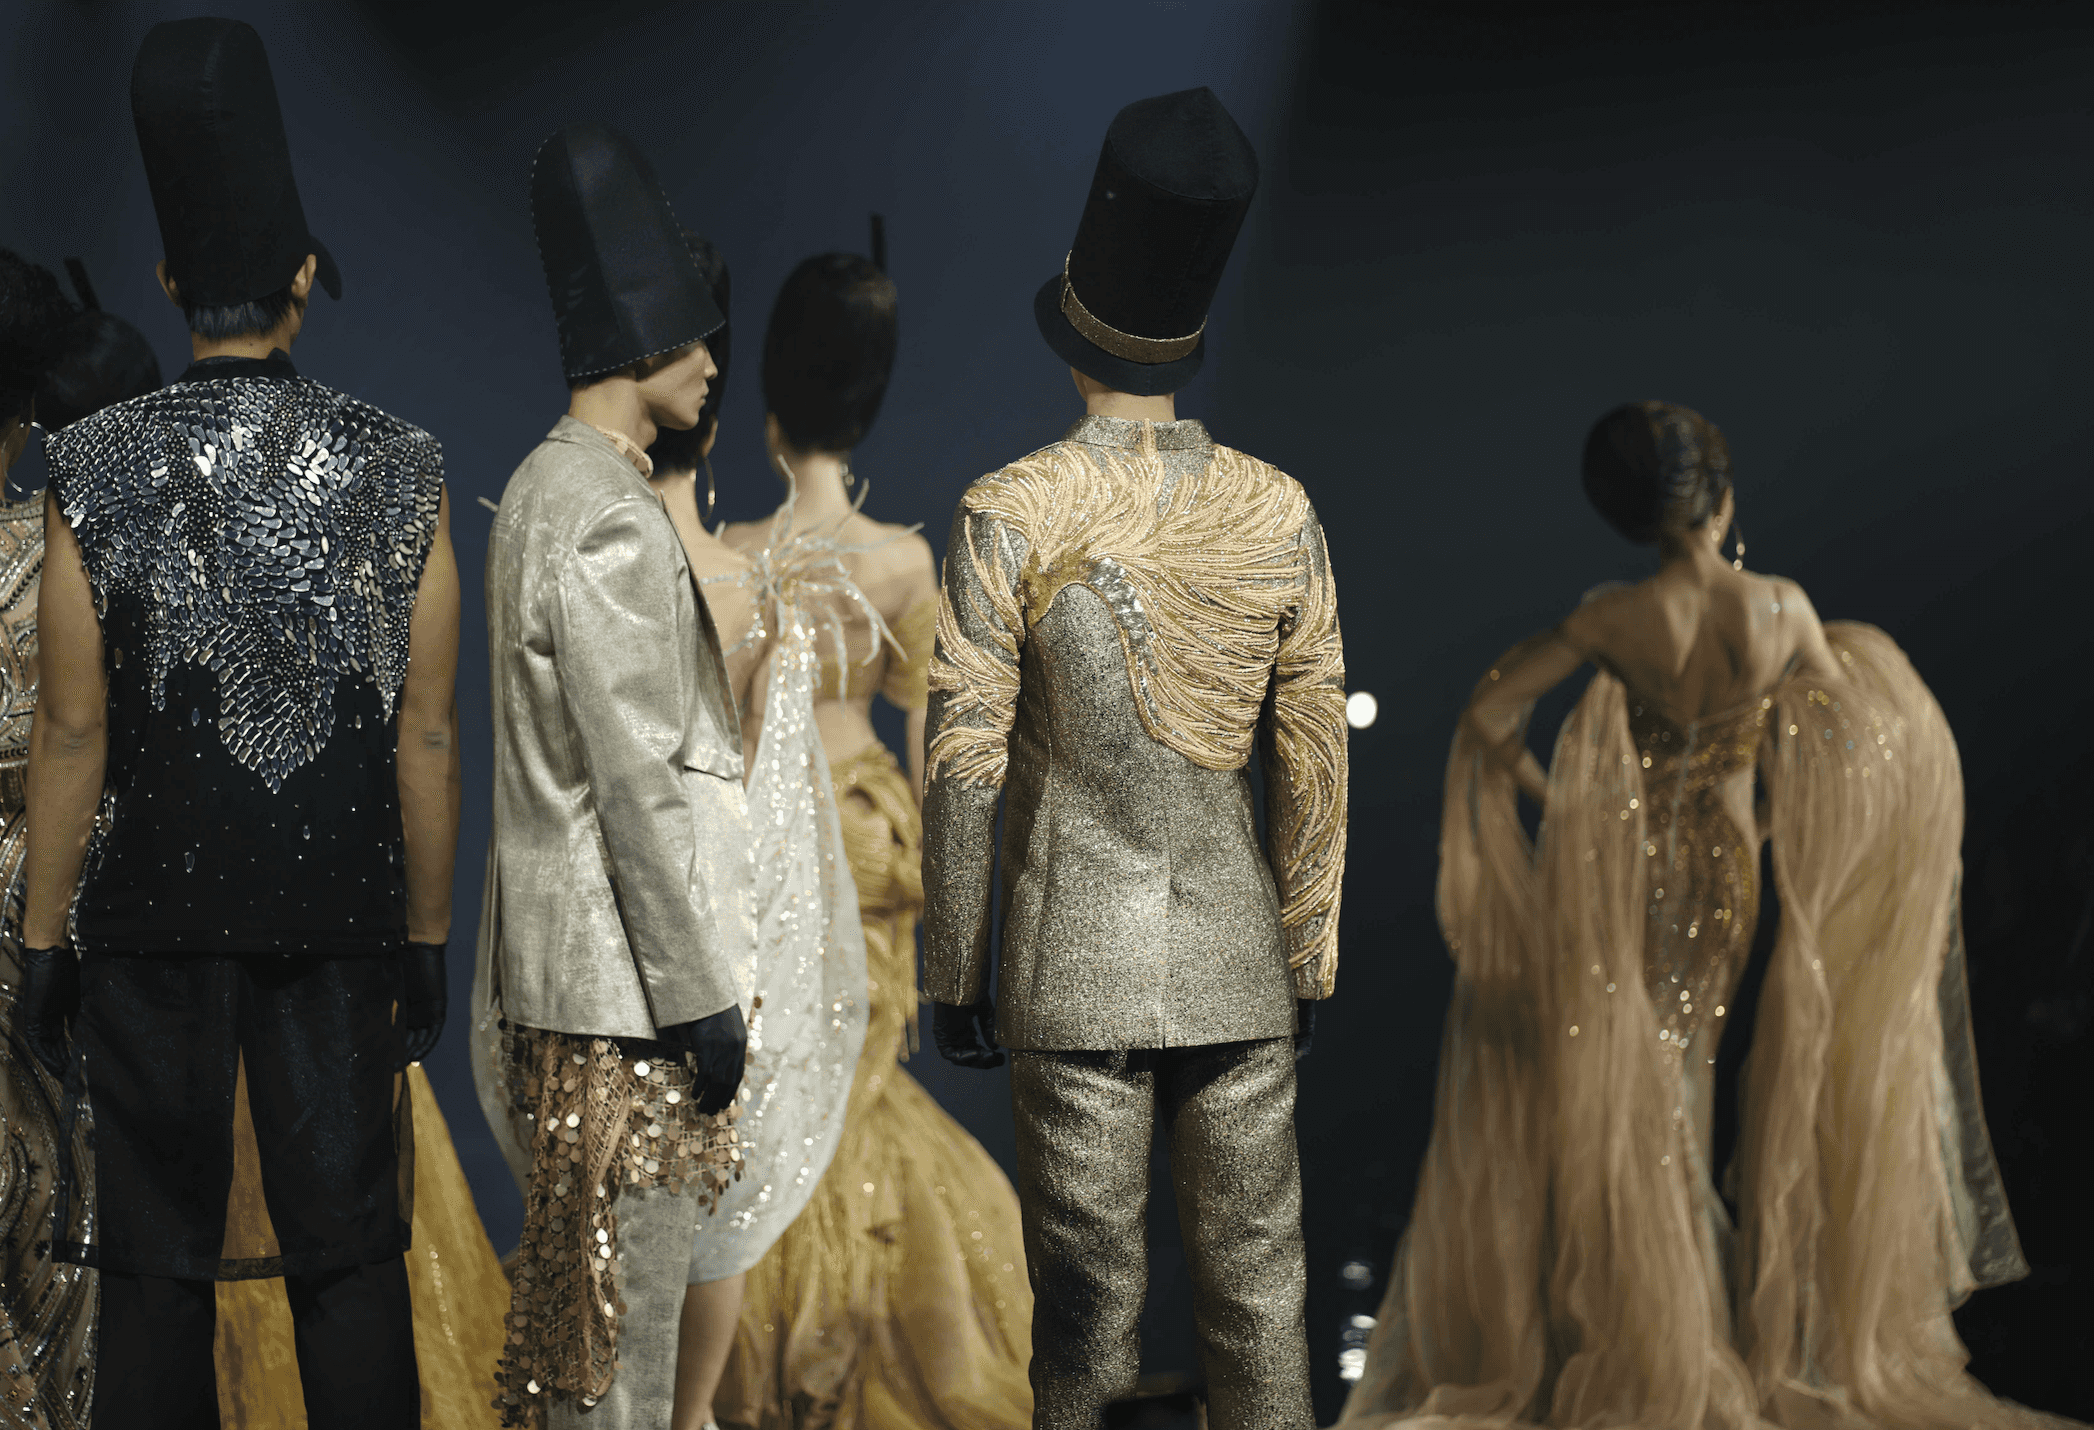 Francis Libiran’s Sterling collection featured sparkly, silver and gold garments with notable architectural patterns